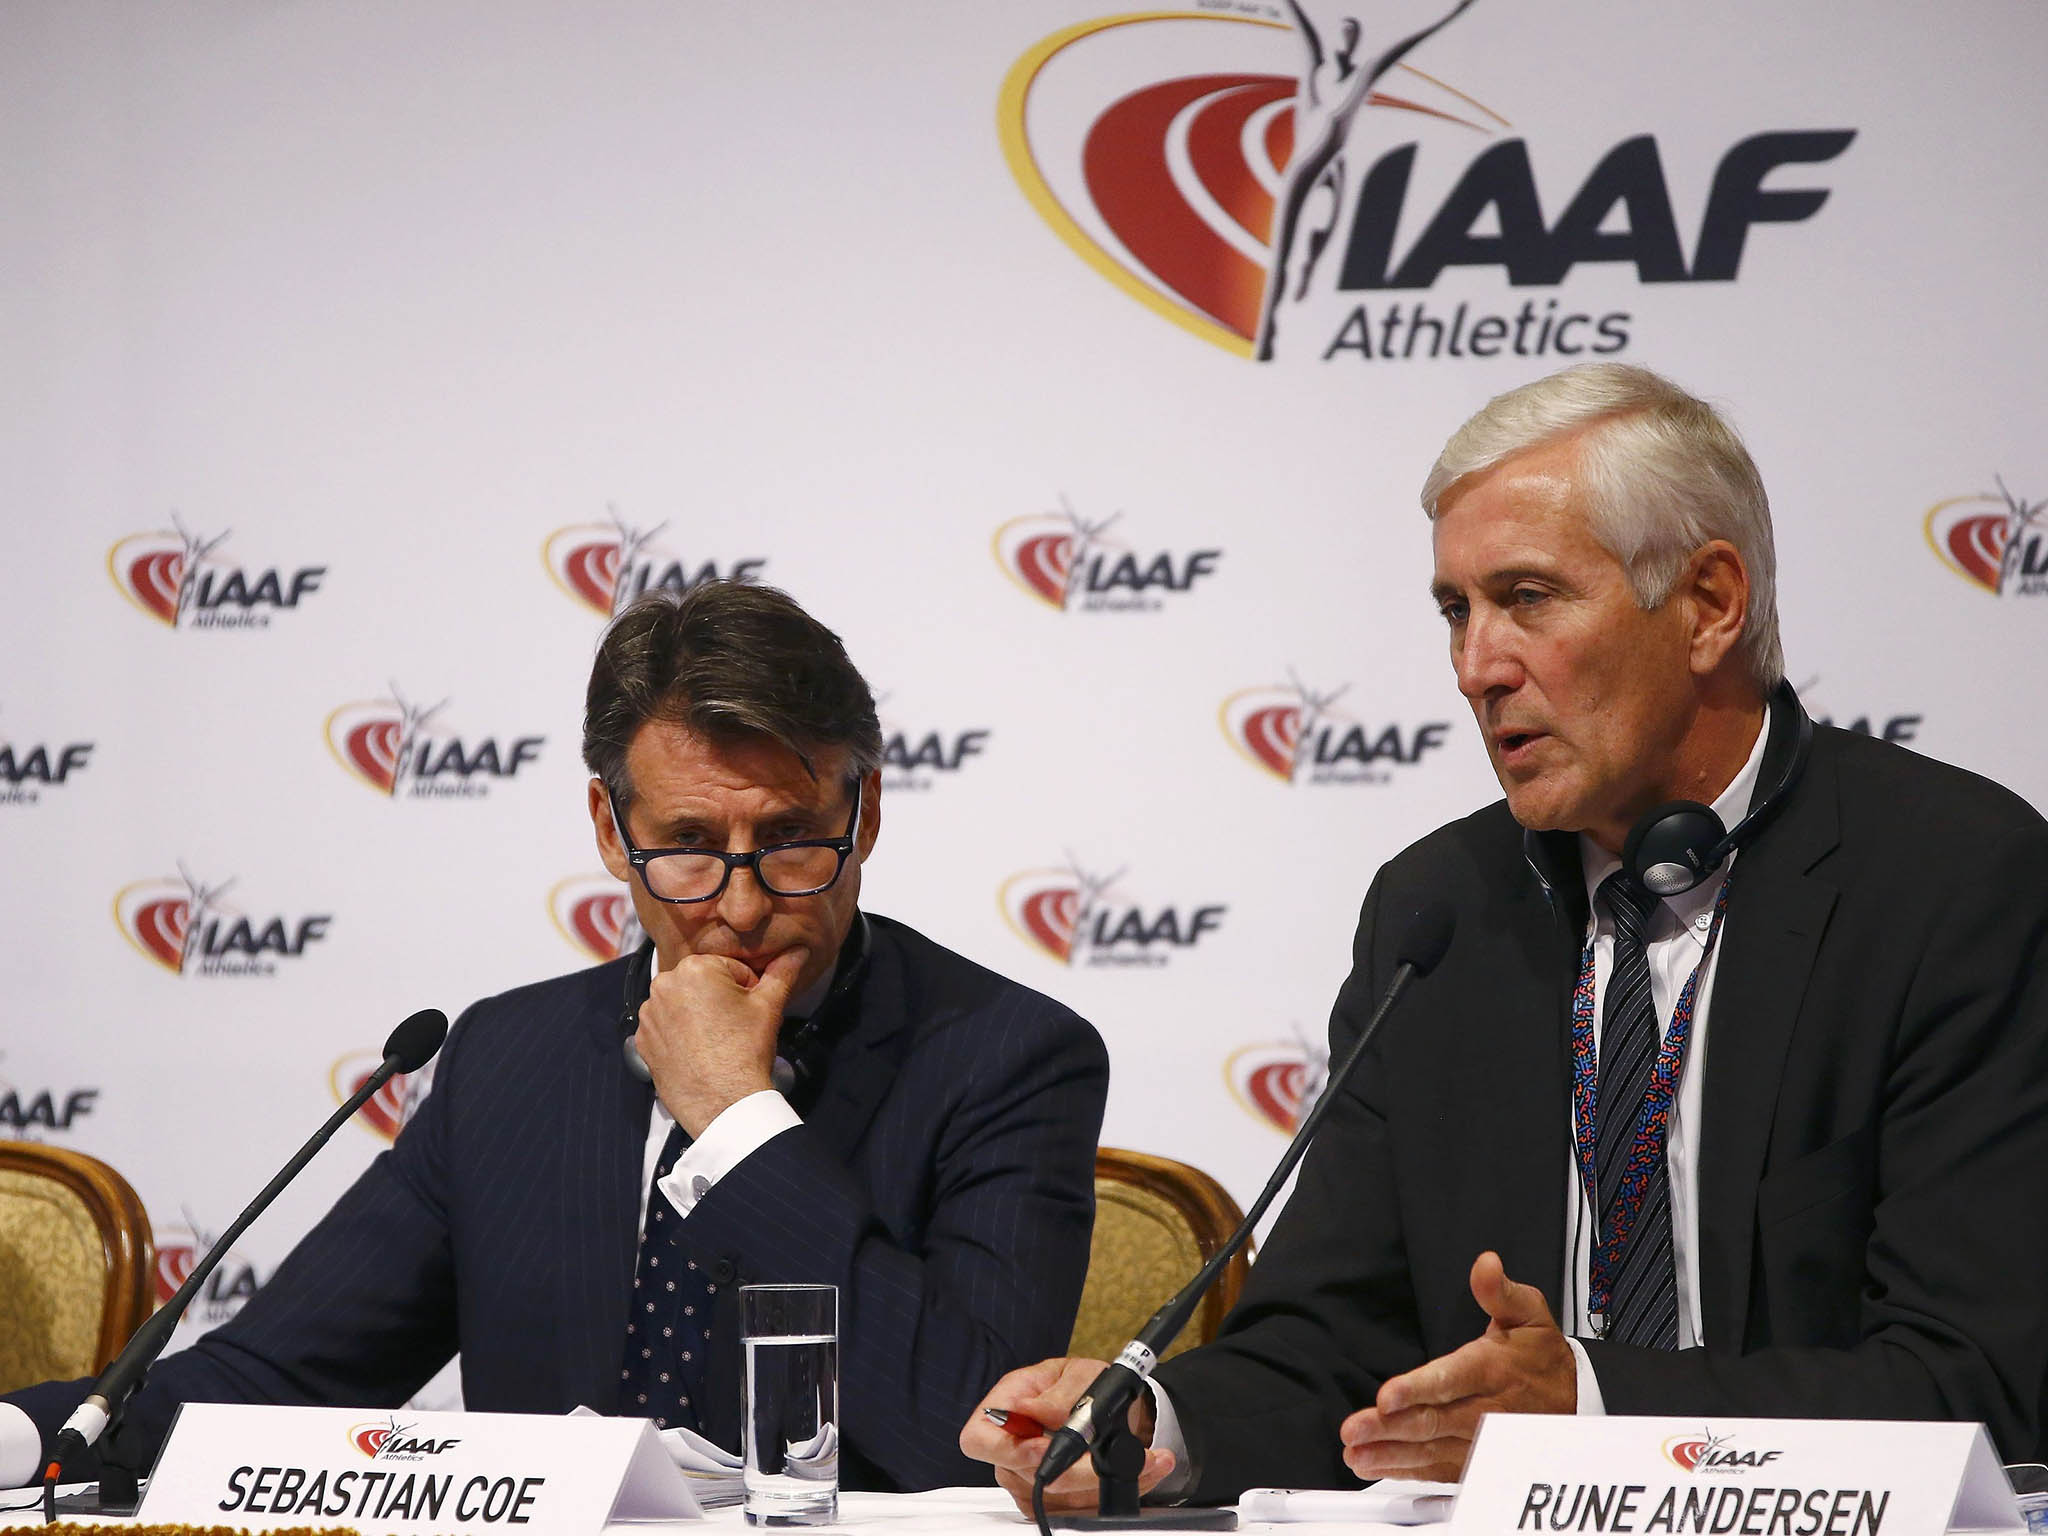 IAAF President Sebastian Coe (L) and Rune Andersen, head of the IAAF taskforce on Russia attend a news conference after the International Association of Athletics Federations